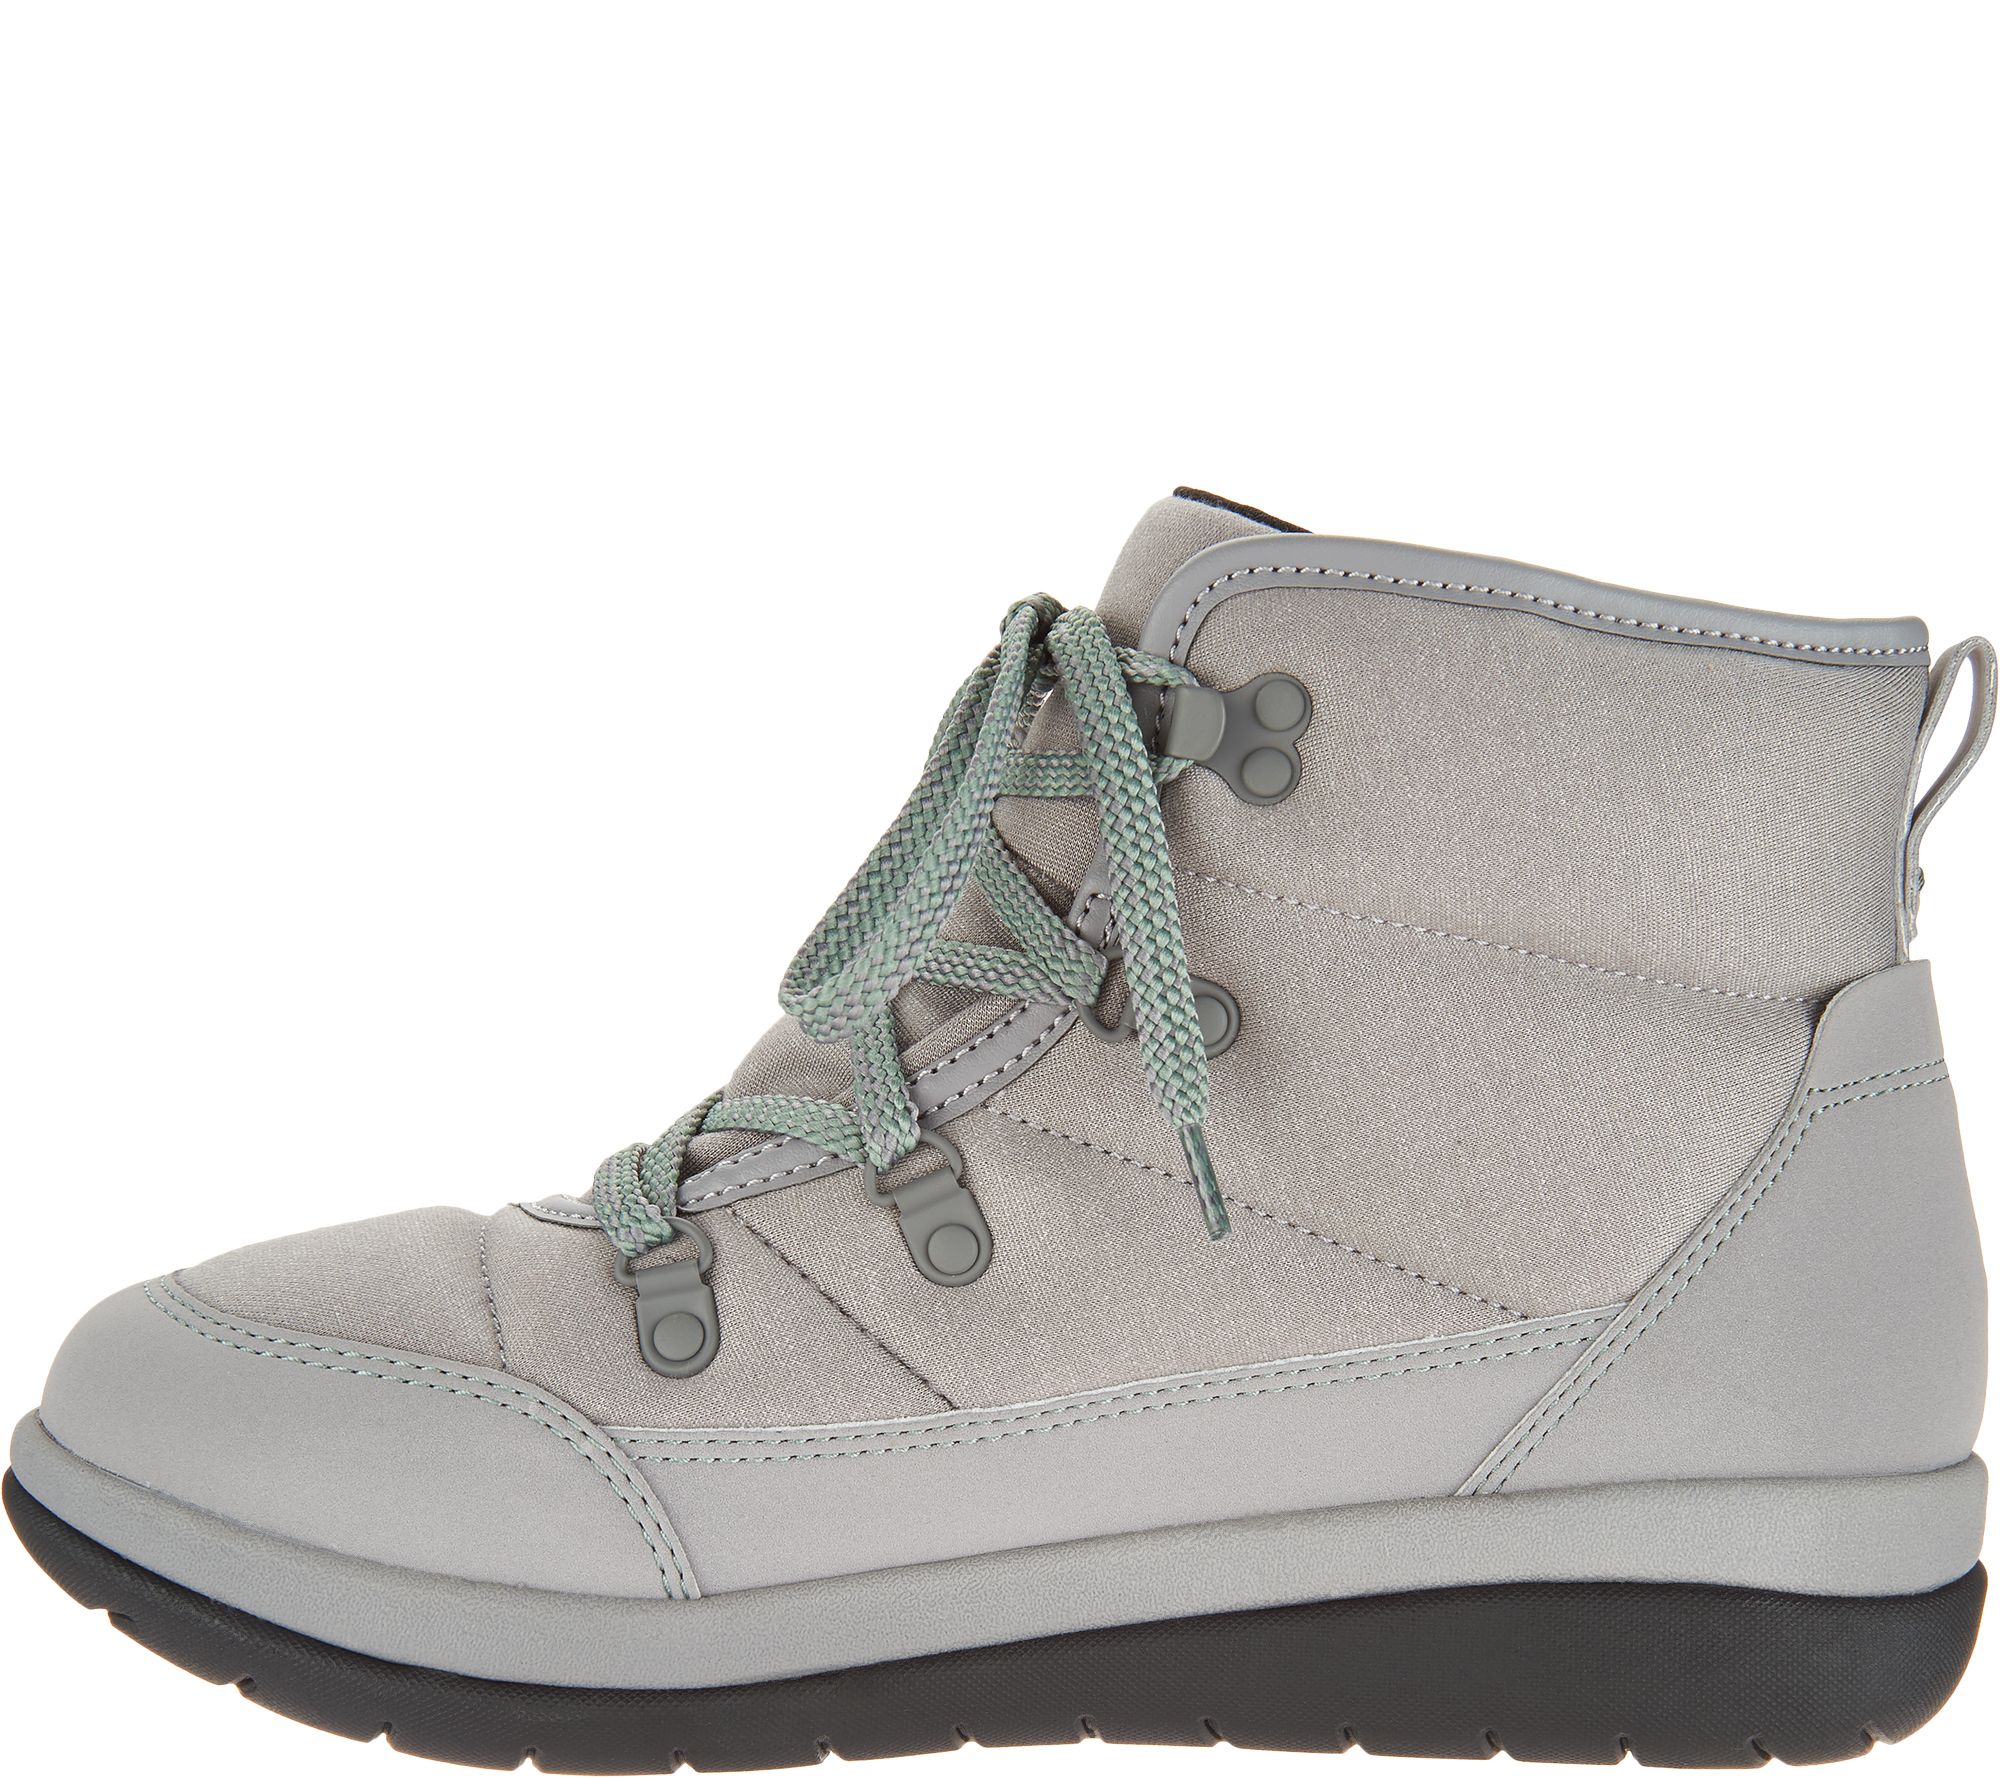 CLOUDSTEPPERS by Clarks Lace-up Boots - Cove Cabrini Cove - QVC.com